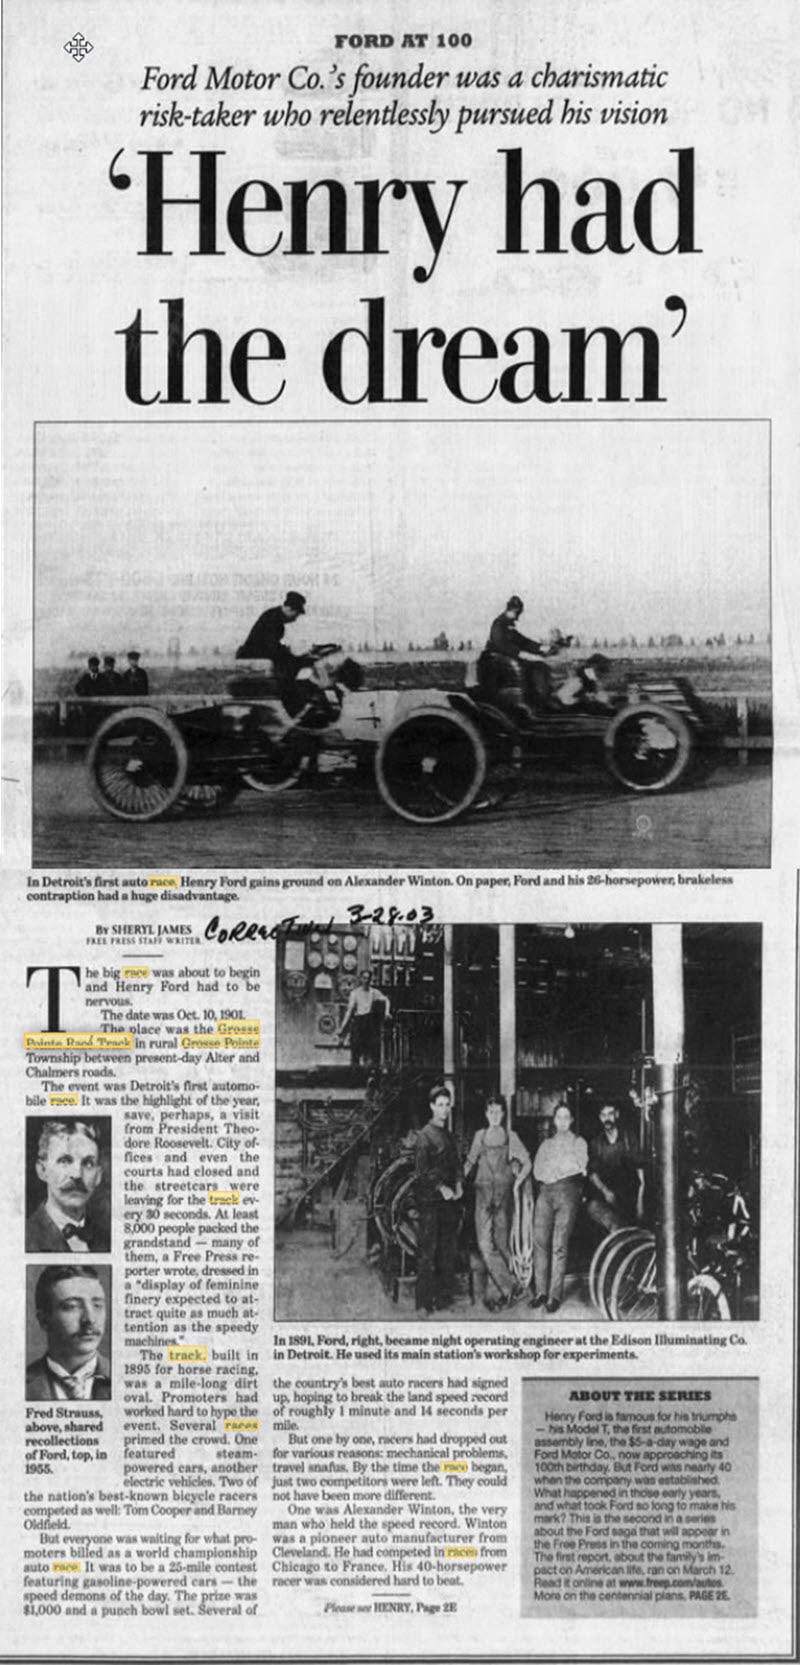 Grosse Pointe Race Track - March 2003 Article On Track